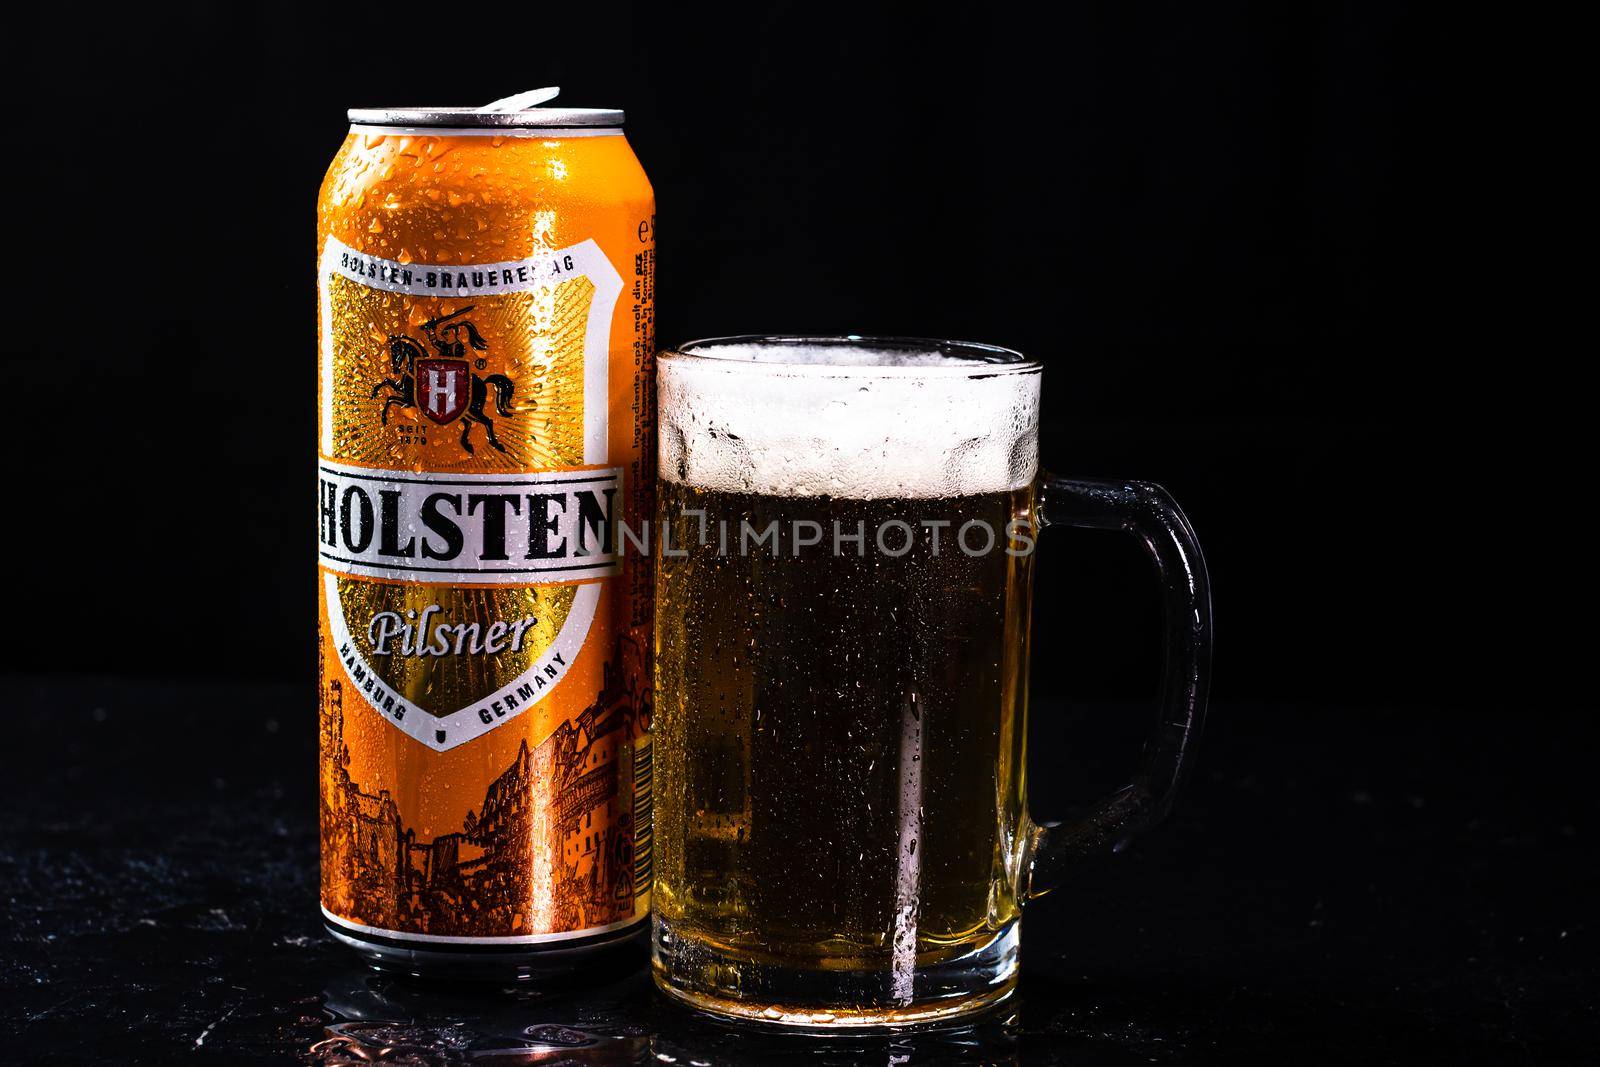 Can of Holsten beer and beer glass on dark background. Illustrative editorial photo shot in Bucharest, Romania, 2021 by vladispas